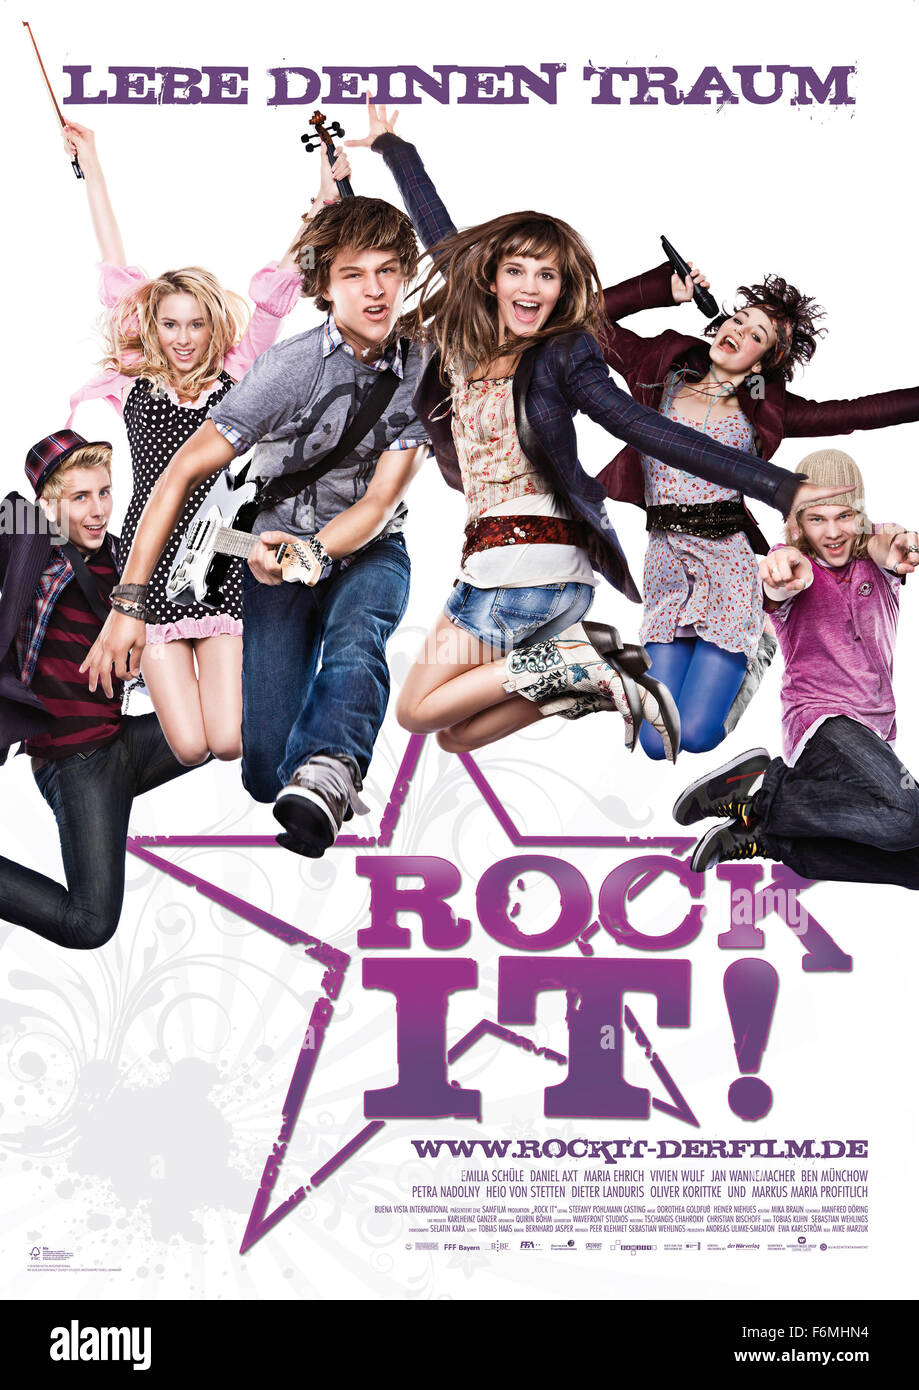 RELEASE DATE: February 18, 2010   MOVIE TITLE: Rock It   STUDIO: SamFilm Produktion   DIRECTOR: Mike Marzuk   PLOT: When being sent to a boarding school for classical music, teenager Julia discovers rock music - and rock musicians. Torn between these two musical worlds, she has to find her own way.   PICTURED: Movie poster   (Credit Image: c SamFilm Produktion/Entertainment Pictures) Stock Photo